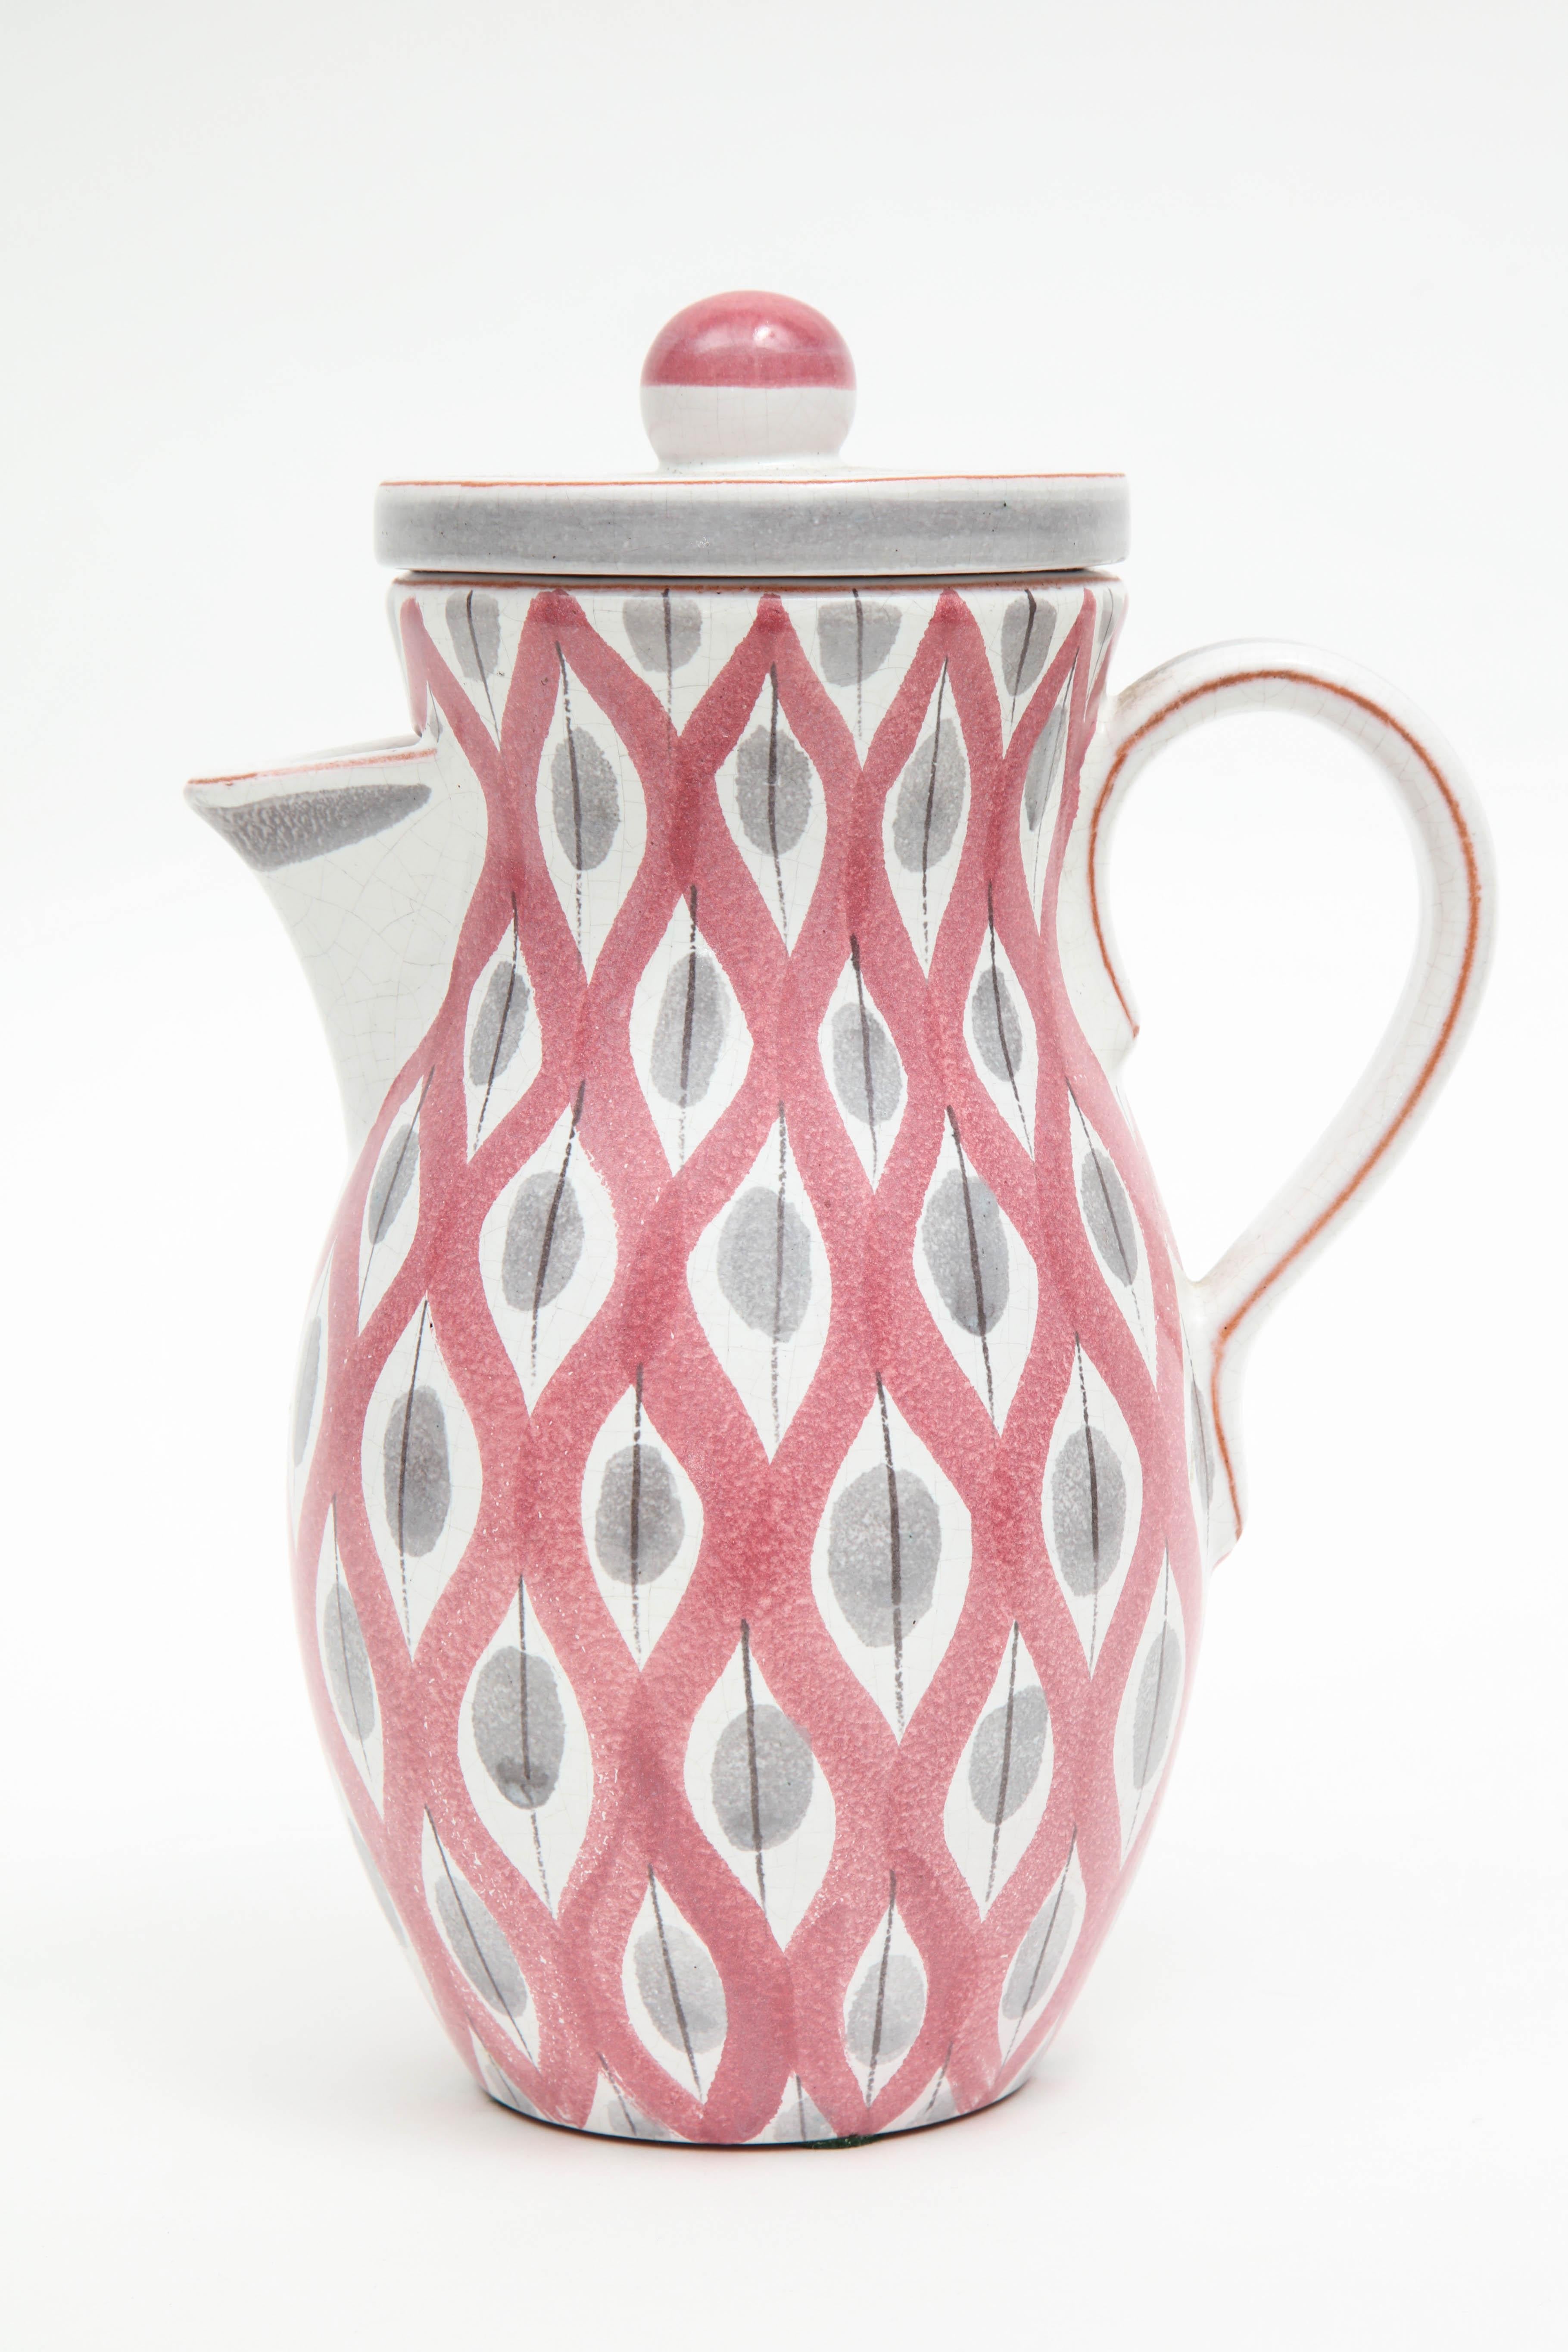 Decorative pitcher by Stig Lindberg, Sweden, circa 1950, by Gustavsberg.
An artistic jack-of-all-trades, Stig Lindberg was accomplished in industrial design, textile design, painting, illustration, glassblowing and ceramics. His whimsical postwar